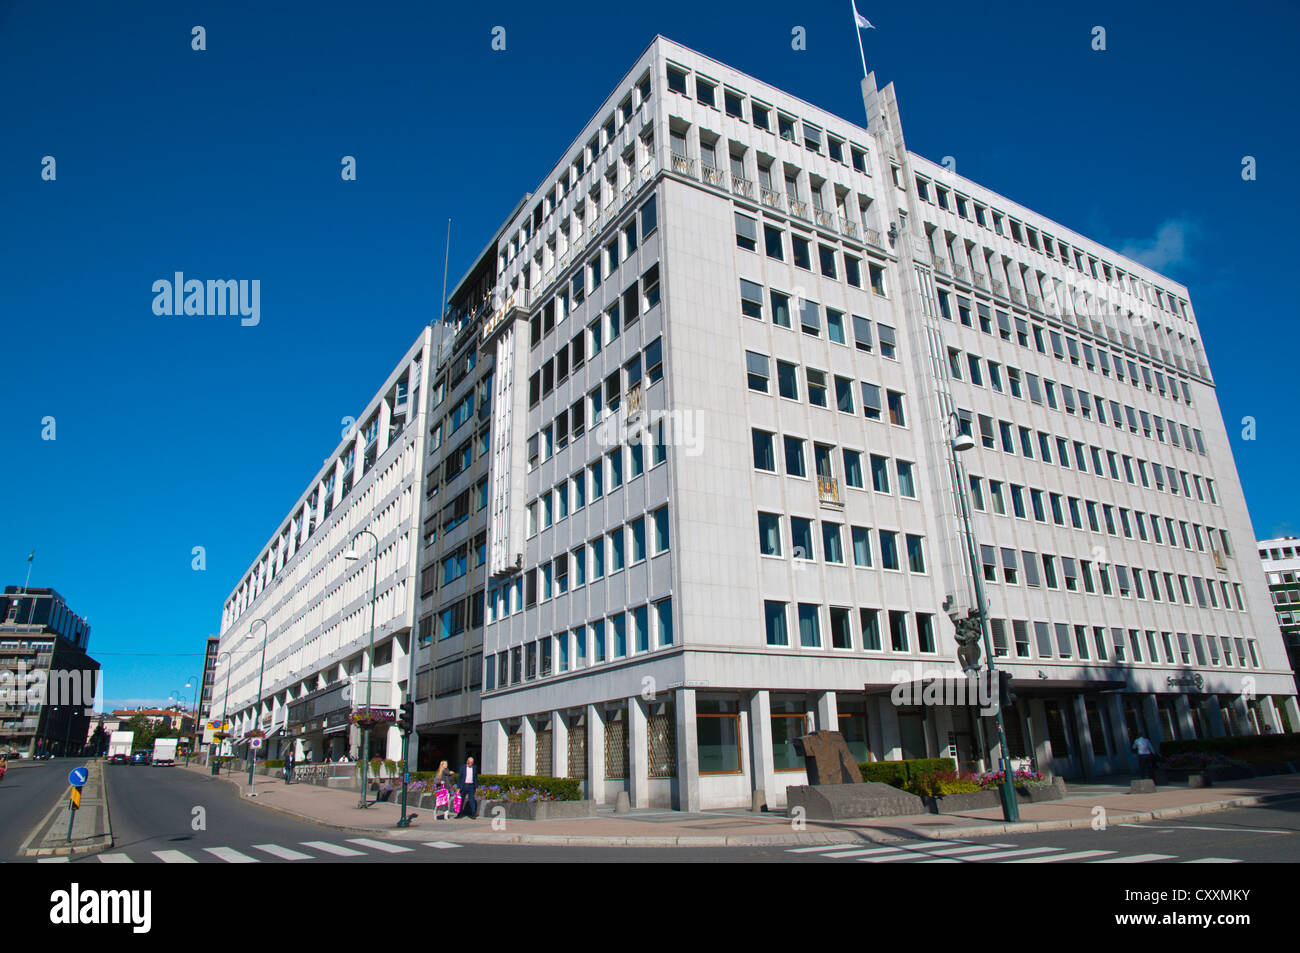 Office buildings along Dronning Mauds gate street Vika district Sentrum  central Oslo Norway Europe Stock Photo - Alamy